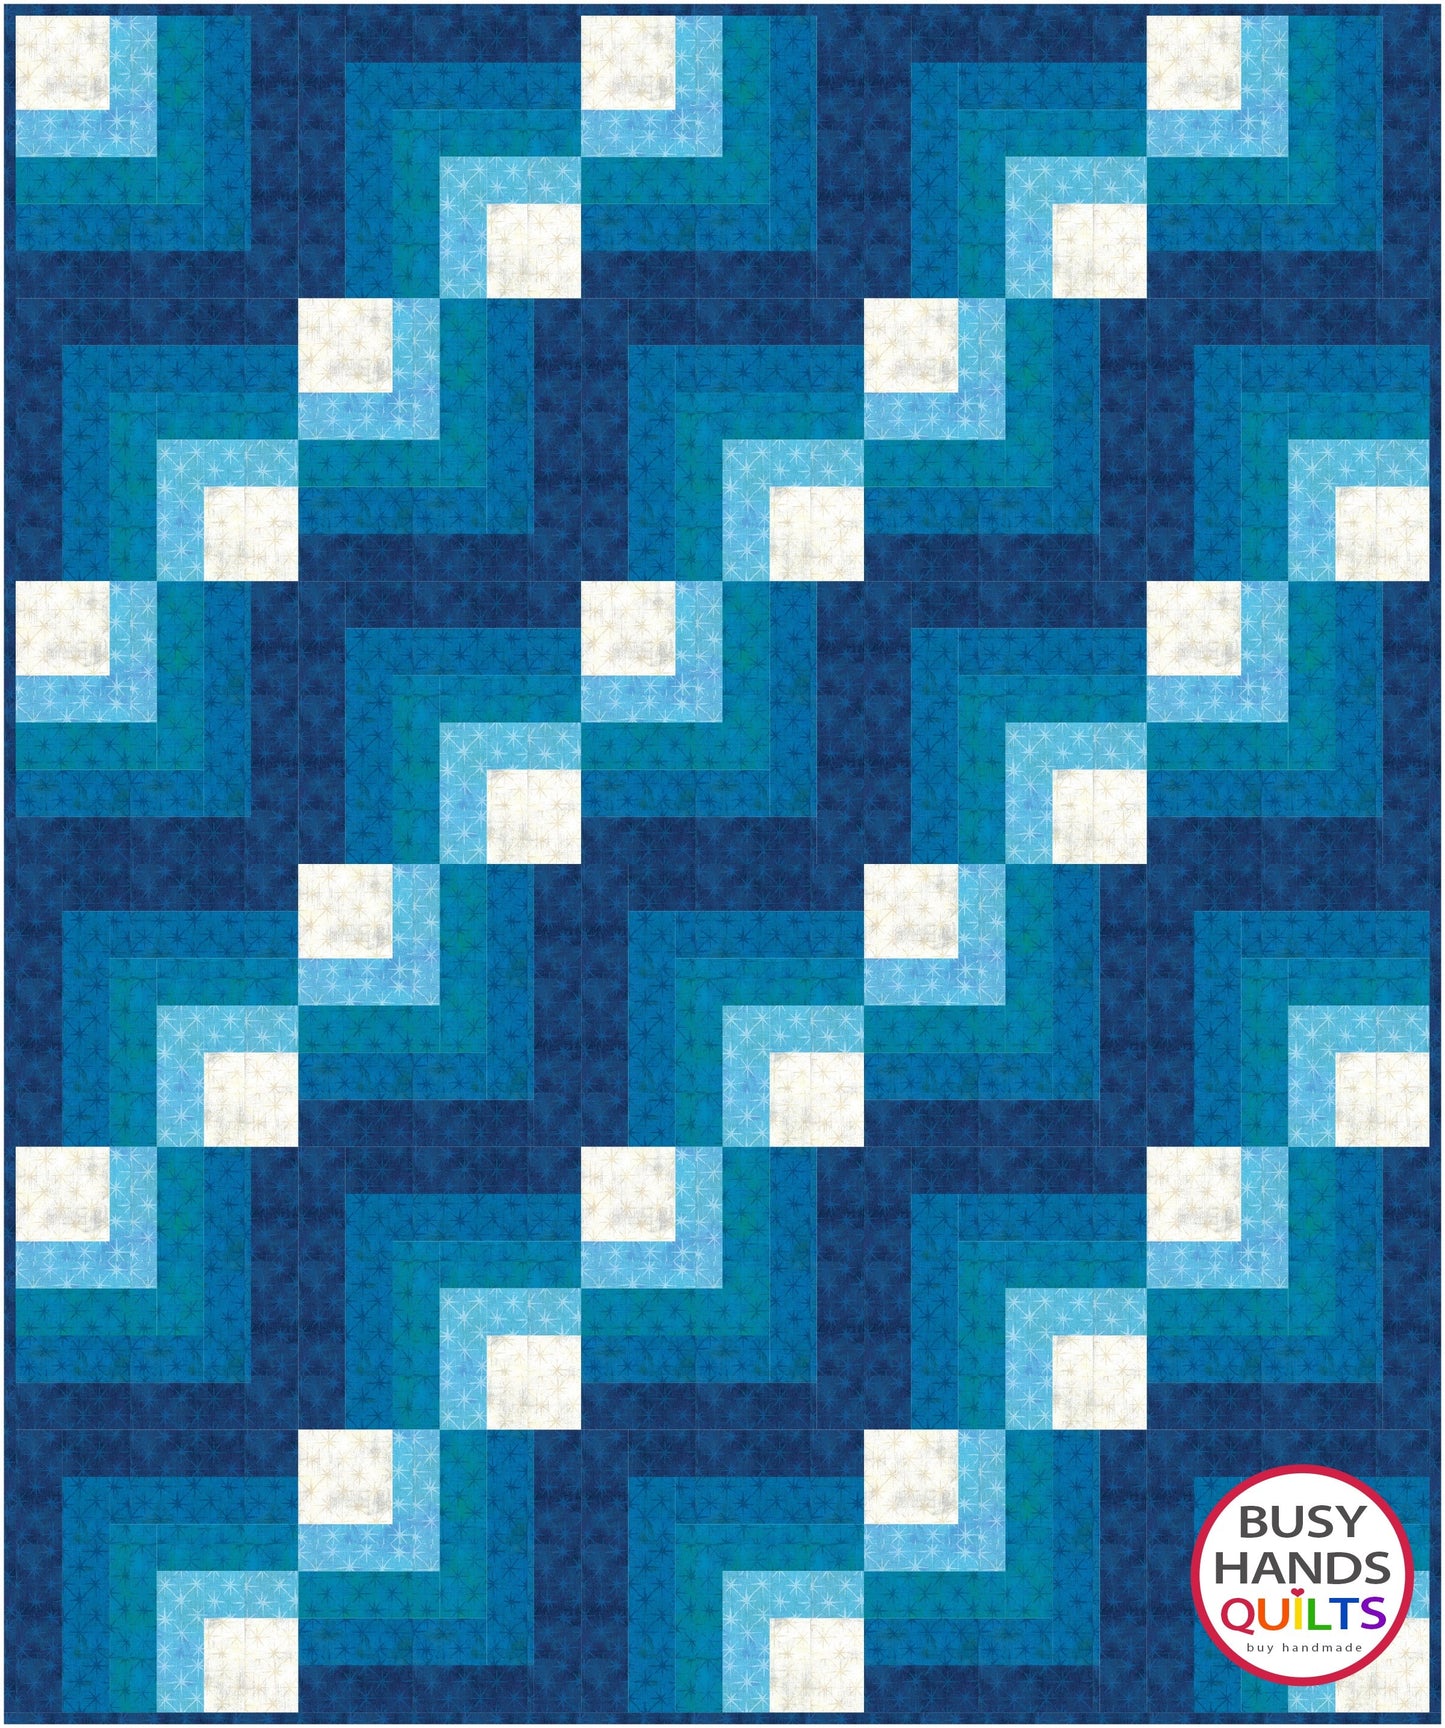 Envision Quilt Pattern PDF DOWNLOAD Busy Hands Quilts $12.99